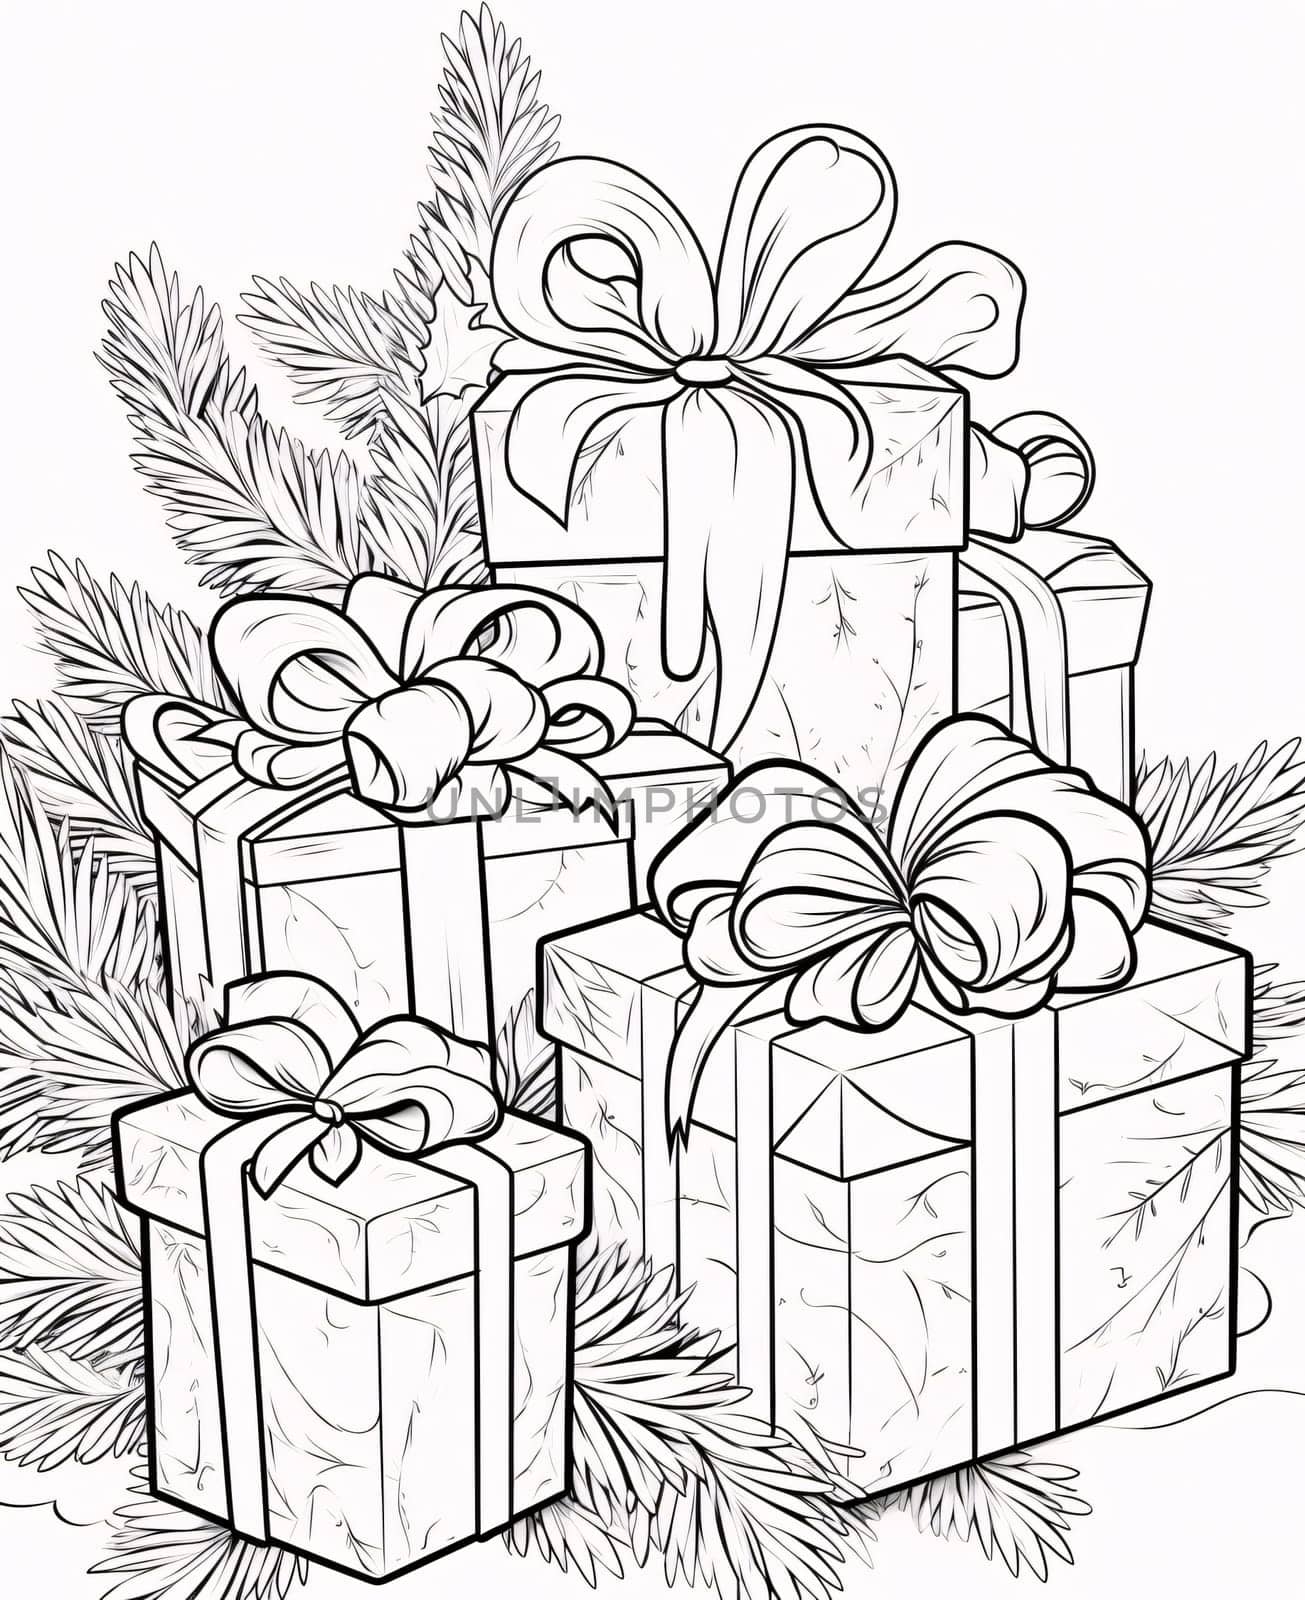 Black and White card with coloring pages, gifts boxes with bows. Gifts as a day symbol of present and love. by ThemesS